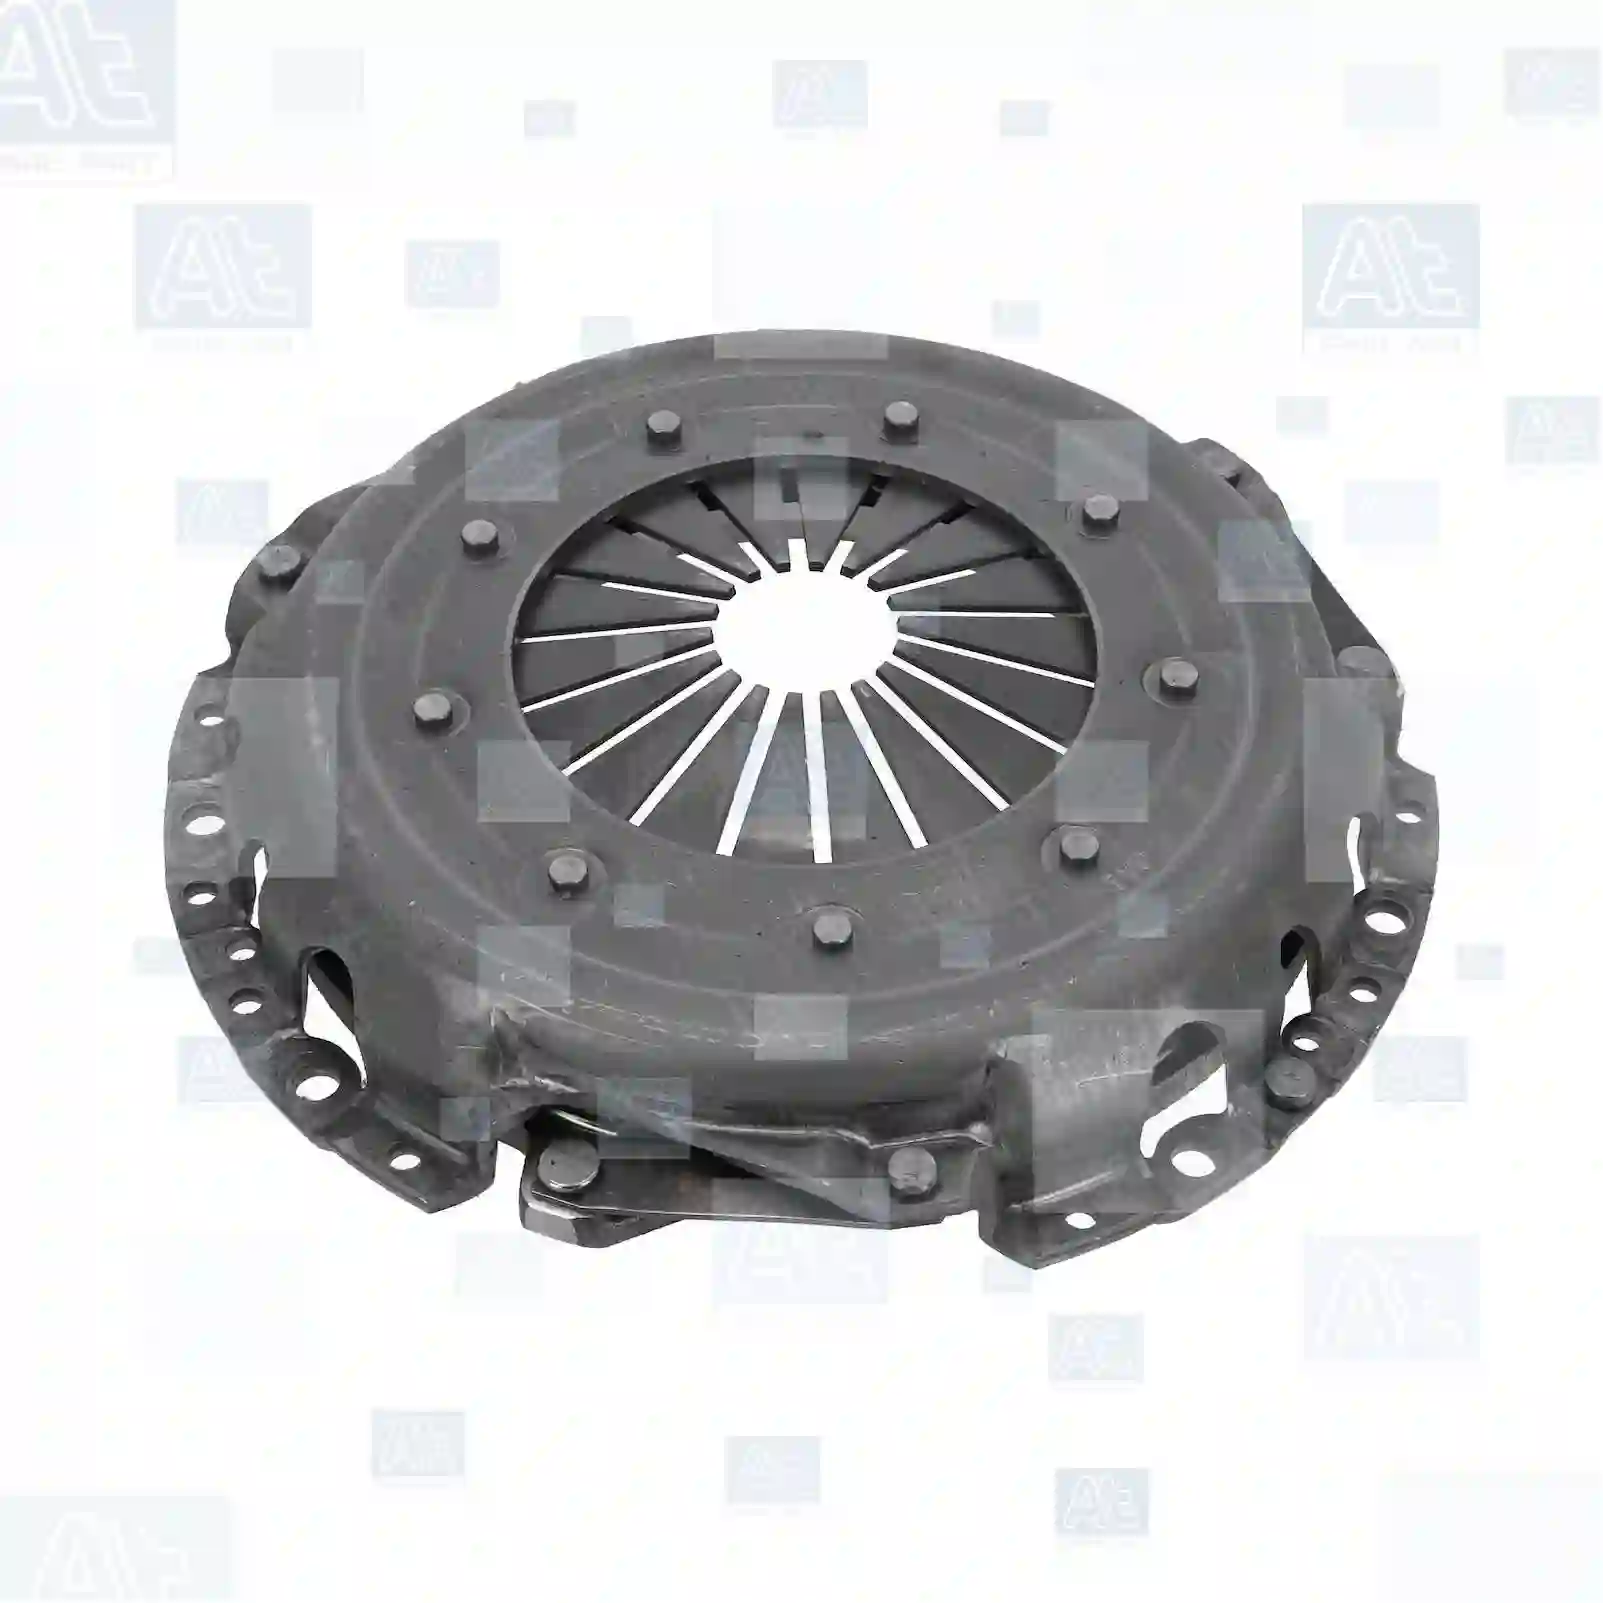 Clutch cover, at no 77722809, oem no: 07651774, 164101203104, 60510328, 60558024, 200485, 05881941, 05882184, 05882262, 05882380, 05888110, 05888745, 05890407, 05984404, 07547183, 07547184, 07662674, 07676856, 07689036, 5984404, 7547184, 7676856, 9606769880, 96067698, 05984404, 98411705, 05881941, 05882262, 05882380, 05888733, 05984404, 05984902, 07547182, 07547183, 07547184, 07651774, 60510328, 200485 At Spare Part | Engine, Accelerator Pedal, Camshaft, Connecting Rod, Crankcase, Crankshaft, Cylinder Head, Engine Suspension Mountings, Exhaust Manifold, Exhaust Gas Recirculation, Filter Kits, Flywheel Housing, General Overhaul Kits, Engine, Intake Manifold, Oil Cleaner, Oil Cooler, Oil Filter, Oil Pump, Oil Sump, Piston & Liner, Sensor & Switch, Timing Case, Turbocharger, Cooling System, Belt Tensioner, Coolant Filter, Coolant Pipe, Corrosion Prevention Agent, Drive, Expansion Tank, Fan, Intercooler, Monitors & Gauges, Radiator, Thermostat, V-Belt / Timing belt, Water Pump, Fuel System, Electronical Injector Unit, Feed Pump, Fuel Filter, cpl., Fuel Gauge Sender,  Fuel Line, Fuel Pump, Fuel Tank, Injection Line Kit, Injection Pump, Exhaust System, Clutch & Pedal, Gearbox, Propeller Shaft, Axles, Brake System, Hubs & Wheels, Suspension, Leaf Spring, Universal Parts / Accessories, Steering, Electrical System, Cabin Clutch cover, at no 77722809, oem no: 07651774, 164101203104, 60510328, 60558024, 200485, 05881941, 05882184, 05882262, 05882380, 05888110, 05888745, 05890407, 05984404, 07547183, 07547184, 07662674, 07676856, 07689036, 5984404, 7547184, 7676856, 9606769880, 96067698, 05984404, 98411705, 05881941, 05882262, 05882380, 05888733, 05984404, 05984902, 07547182, 07547183, 07547184, 07651774, 60510328, 200485 At Spare Part | Engine, Accelerator Pedal, Camshaft, Connecting Rod, Crankcase, Crankshaft, Cylinder Head, Engine Suspension Mountings, Exhaust Manifold, Exhaust Gas Recirculation, Filter Kits, Flywheel Housing, General Overhaul Kits, Engine, Intake Manifold, Oil Cleaner, Oil Cooler, Oil Filter, Oil Pump, Oil Sump, Piston & Liner, Sensor & Switch, Timing Case, Turbocharger, Cooling System, Belt Tensioner, Coolant Filter, Coolant Pipe, Corrosion Prevention Agent, Drive, Expansion Tank, Fan, Intercooler, Monitors & Gauges, Radiator, Thermostat, V-Belt / Timing belt, Water Pump, Fuel System, Electronical Injector Unit, Feed Pump, Fuel Filter, cpl., Fuel Gauge Sender,  Fuel Line, Fuel Pump, Fuel Tank, Injection Line Kit, Injection Pump, Exhaust System, Clutch & Pedal, Gearbox, Propeller Shaft, Axles, Brake System, Hubs & Wheels, Suspension, Leaf Spring, Universal Parts / Accessories, Steering, Electrical System, Cabin